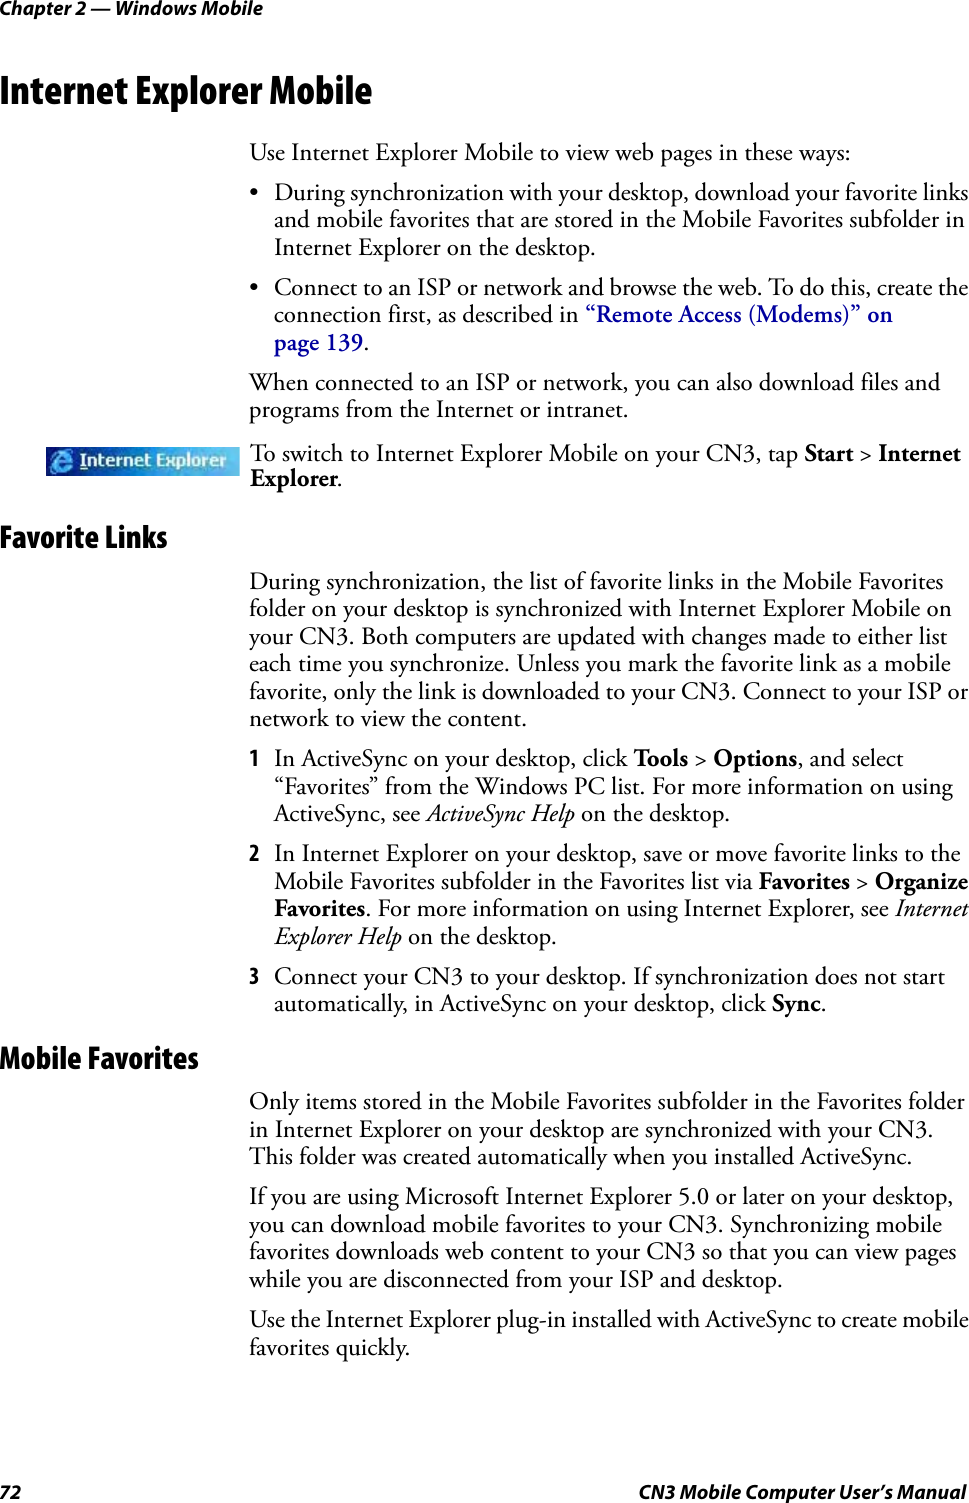 Chapter 2 — Windows Mobile72 CN3 Mobile Computer User’s ManualInternet Explorer MobileUse Internet Explorer Mobile to view web pages in these ways:• During synchronization with your desktop, download your favorite links and mobile favorites that are stored in the Mobile Favorites subfolder in Internet Explorer on the desktop.• Connect to an ISP or network and browse the web. To do this, create the connection first, as described in “Remote Access (Modems)” on page 139.When connected to an ISP or network, you can also download files and programs from the Internet or intranet.Favorite LinksDuring synchronization, the list of favorite links in the Mobile Favorites folder on your desktop is synchronized with Internet Explorer Mobile on your CN3. Both computers are updated with changes made to either list each time you synchronize. Unless you mark the favorite link as a mobile favorite, only the link is downloaded to your CN3. Connect to your ISP or network to view the content.1In ActiveSync on your desktop, click Tools &gt; Options, and select “Favorites” from the Windows PC list. For more information on using ActiveSync, see ActiveSync Help on the desktop.2In Internet Explorer on your desktop, save or move favorite links to the Mobile Favorites subfolder in the Favorites list via Favorites &gt; Organize Favorites. For more information on using Internet Explorer, see Internet Explorer Help on the desktop.3Connect your CN3 to your desktop. If synchronization does not start automatically, in ActiveSync on your desktop, click Sync.Mobile FavoritesOnly items stored in the Mobile Favorites subfolder in the Favorites folder in Internet Explorer on your desktop are synchronized with your CN3. This folder was created automatically when you installed ActiveSync.If you are using Microsoft Internet Explorer 5.0 or later on your desktop, you can download mobile favorites to your CN3. Synchronizing mobile favorites downloads web content to your CN3 so that you can view pages while you are disconnected from your ISP and desktop.Use the Internet Explorer plug-in installed with ActiveSync to create mobile favorites quickly. To switch to Internet Explorer Mobile on your CN3, tap Start &gt; Internet Explorer. 